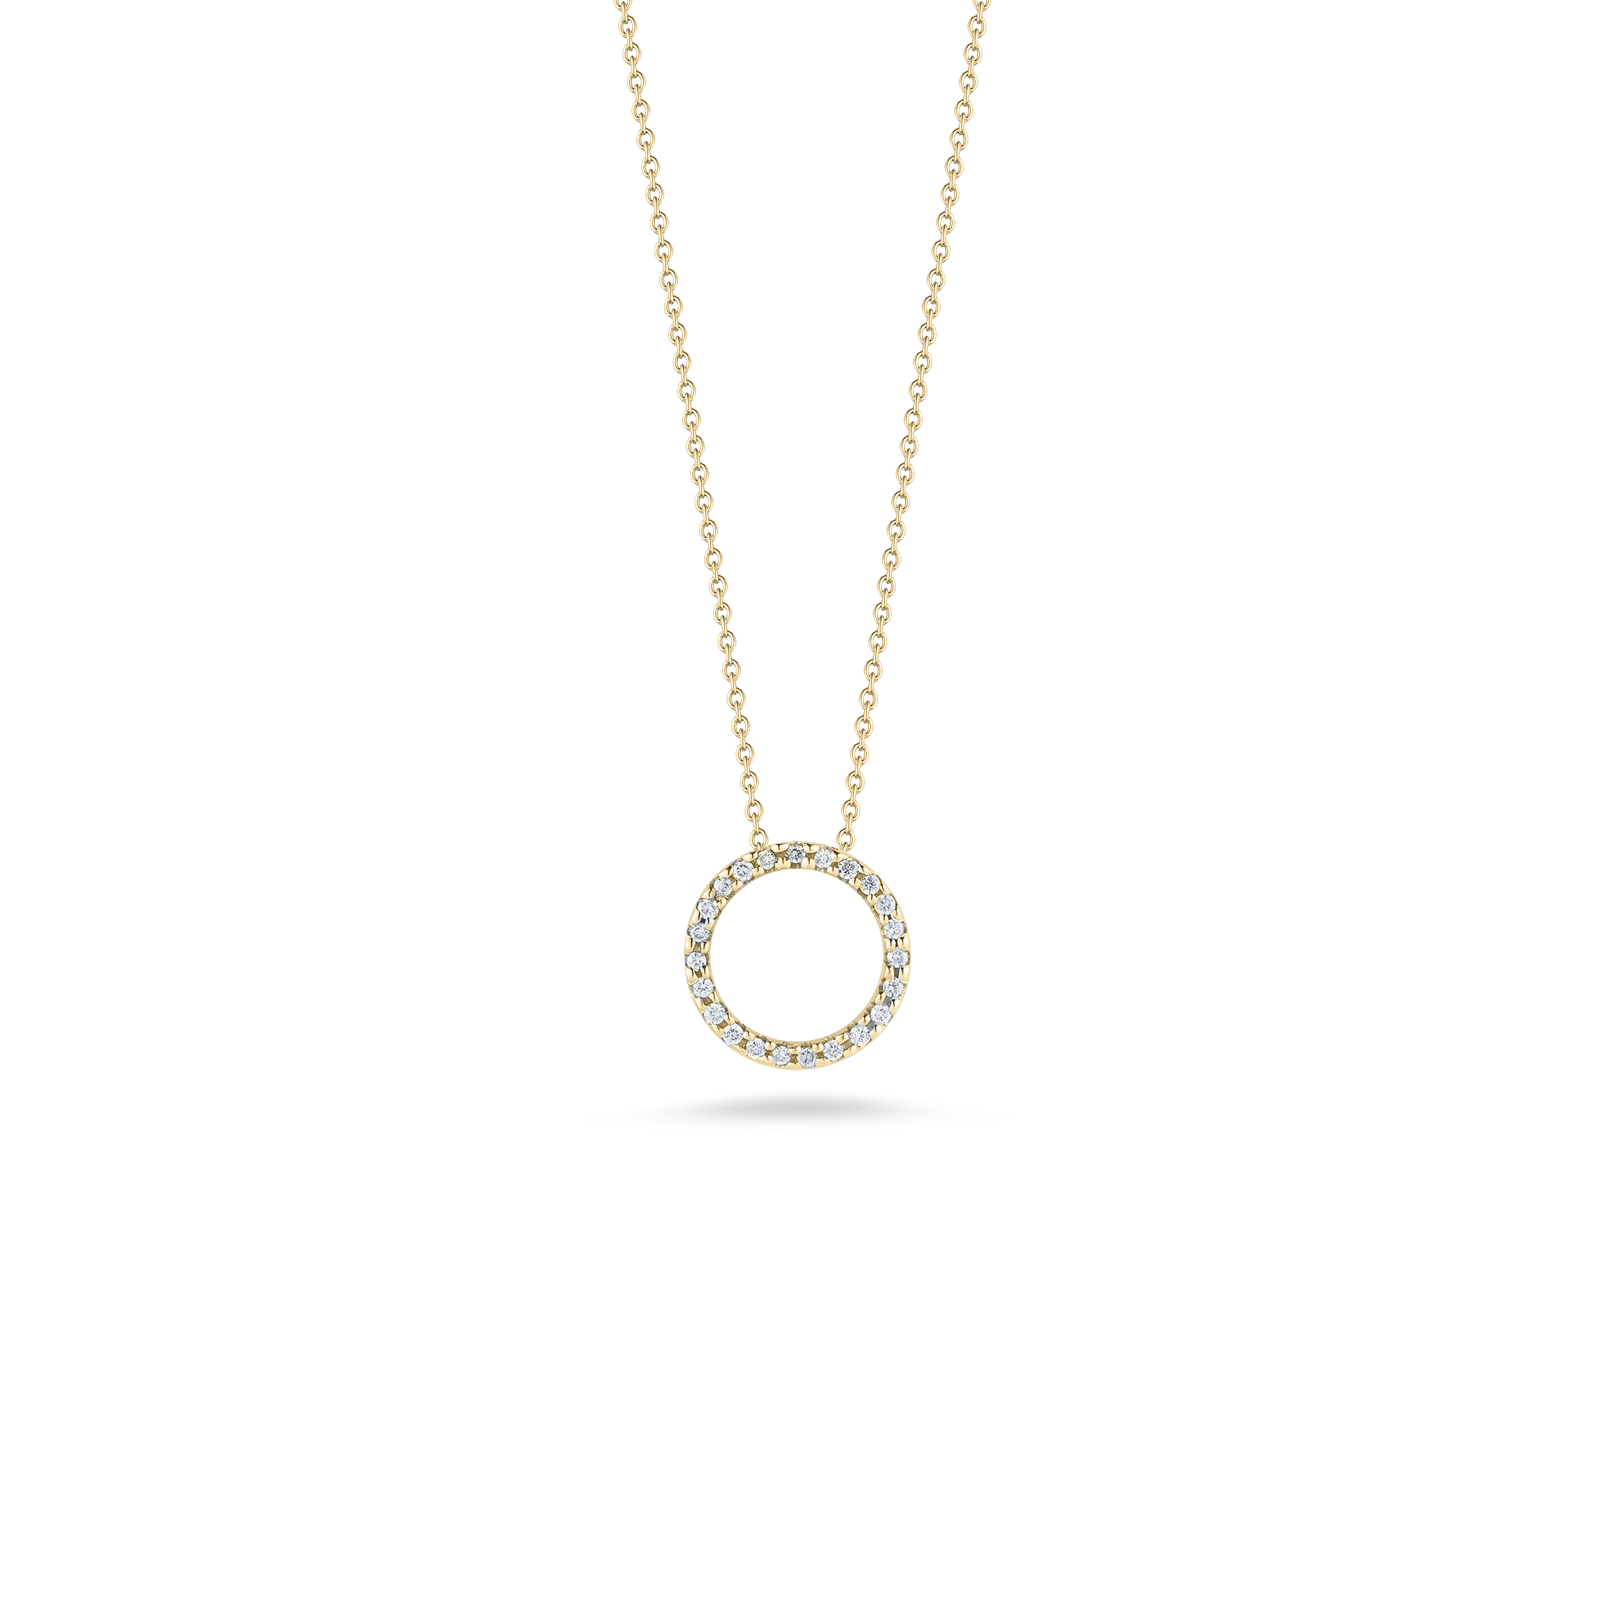 Tiny Treasures Small Diamond Circle Necklace in 18kt Yellow Gold